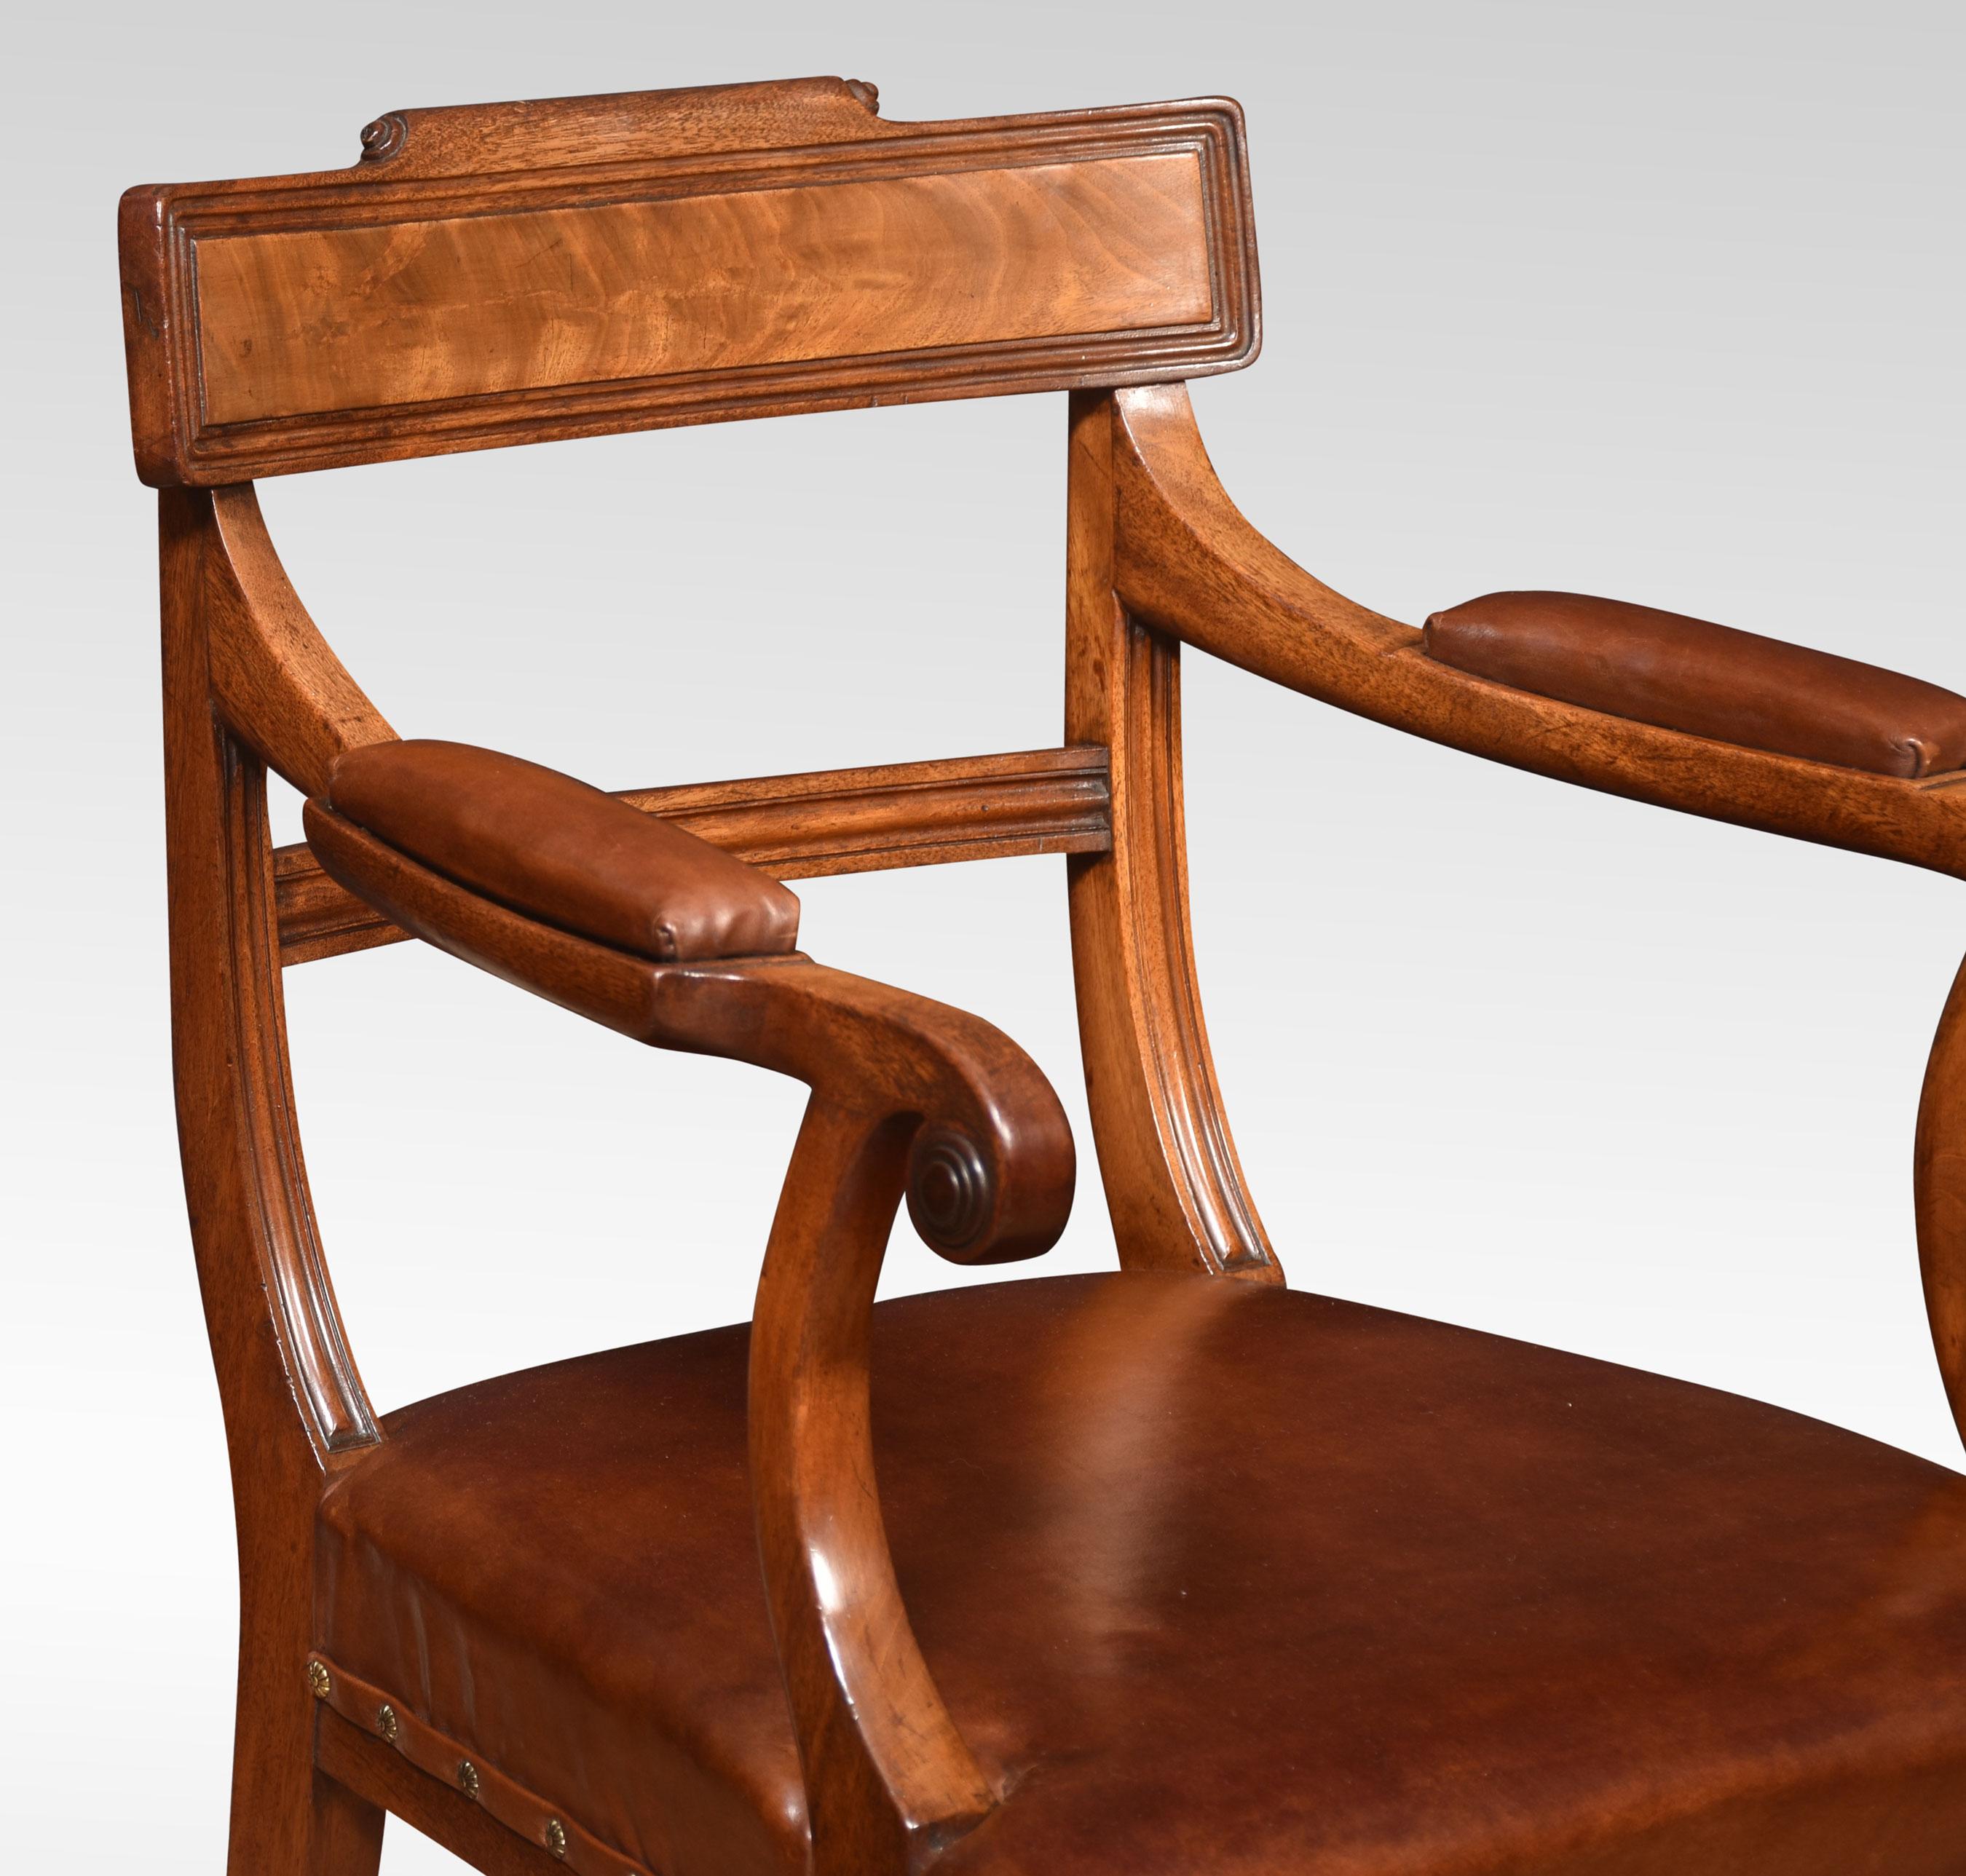 A set of eight Regency mahogany dining chairs. Comprising of two carvers and six chairs. Each with shaped top rail and central backrest, to the brown leather seats. All raised up on saber legs.
Dimensions
Armchairs
Height 33 Inches Height to seat